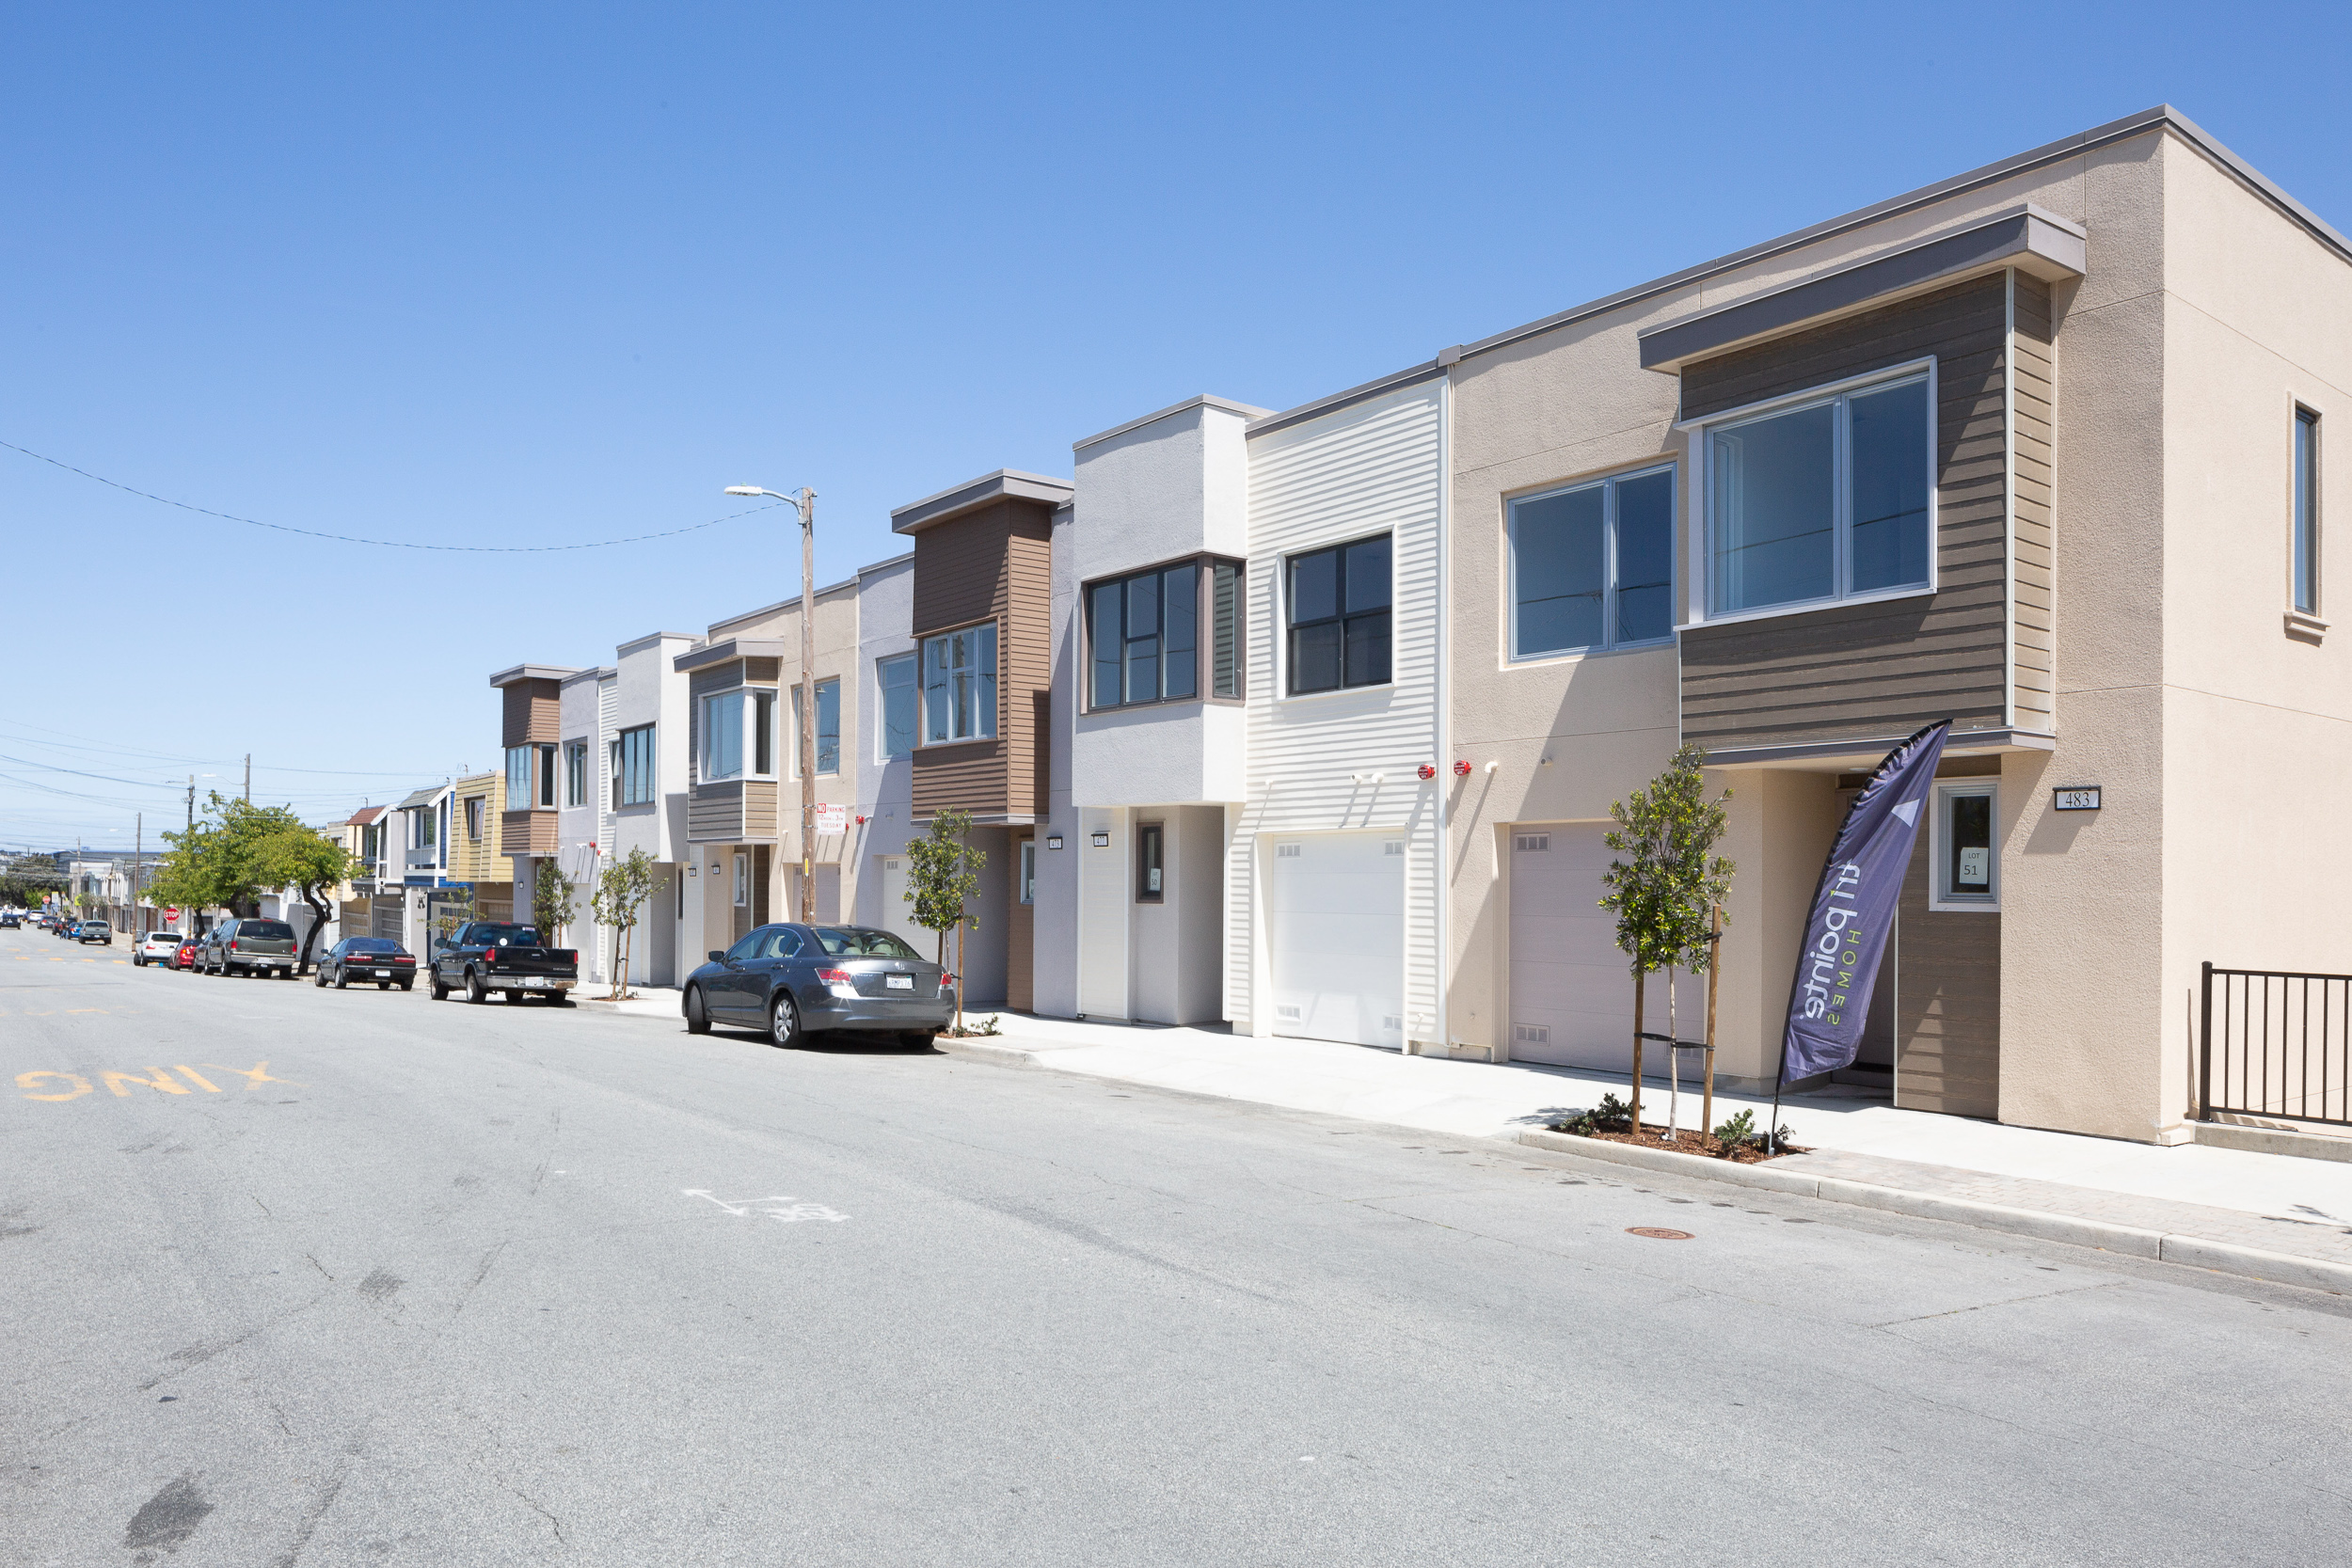 Lofton at Portola townhomes, image by Andrew Campbell Nelson